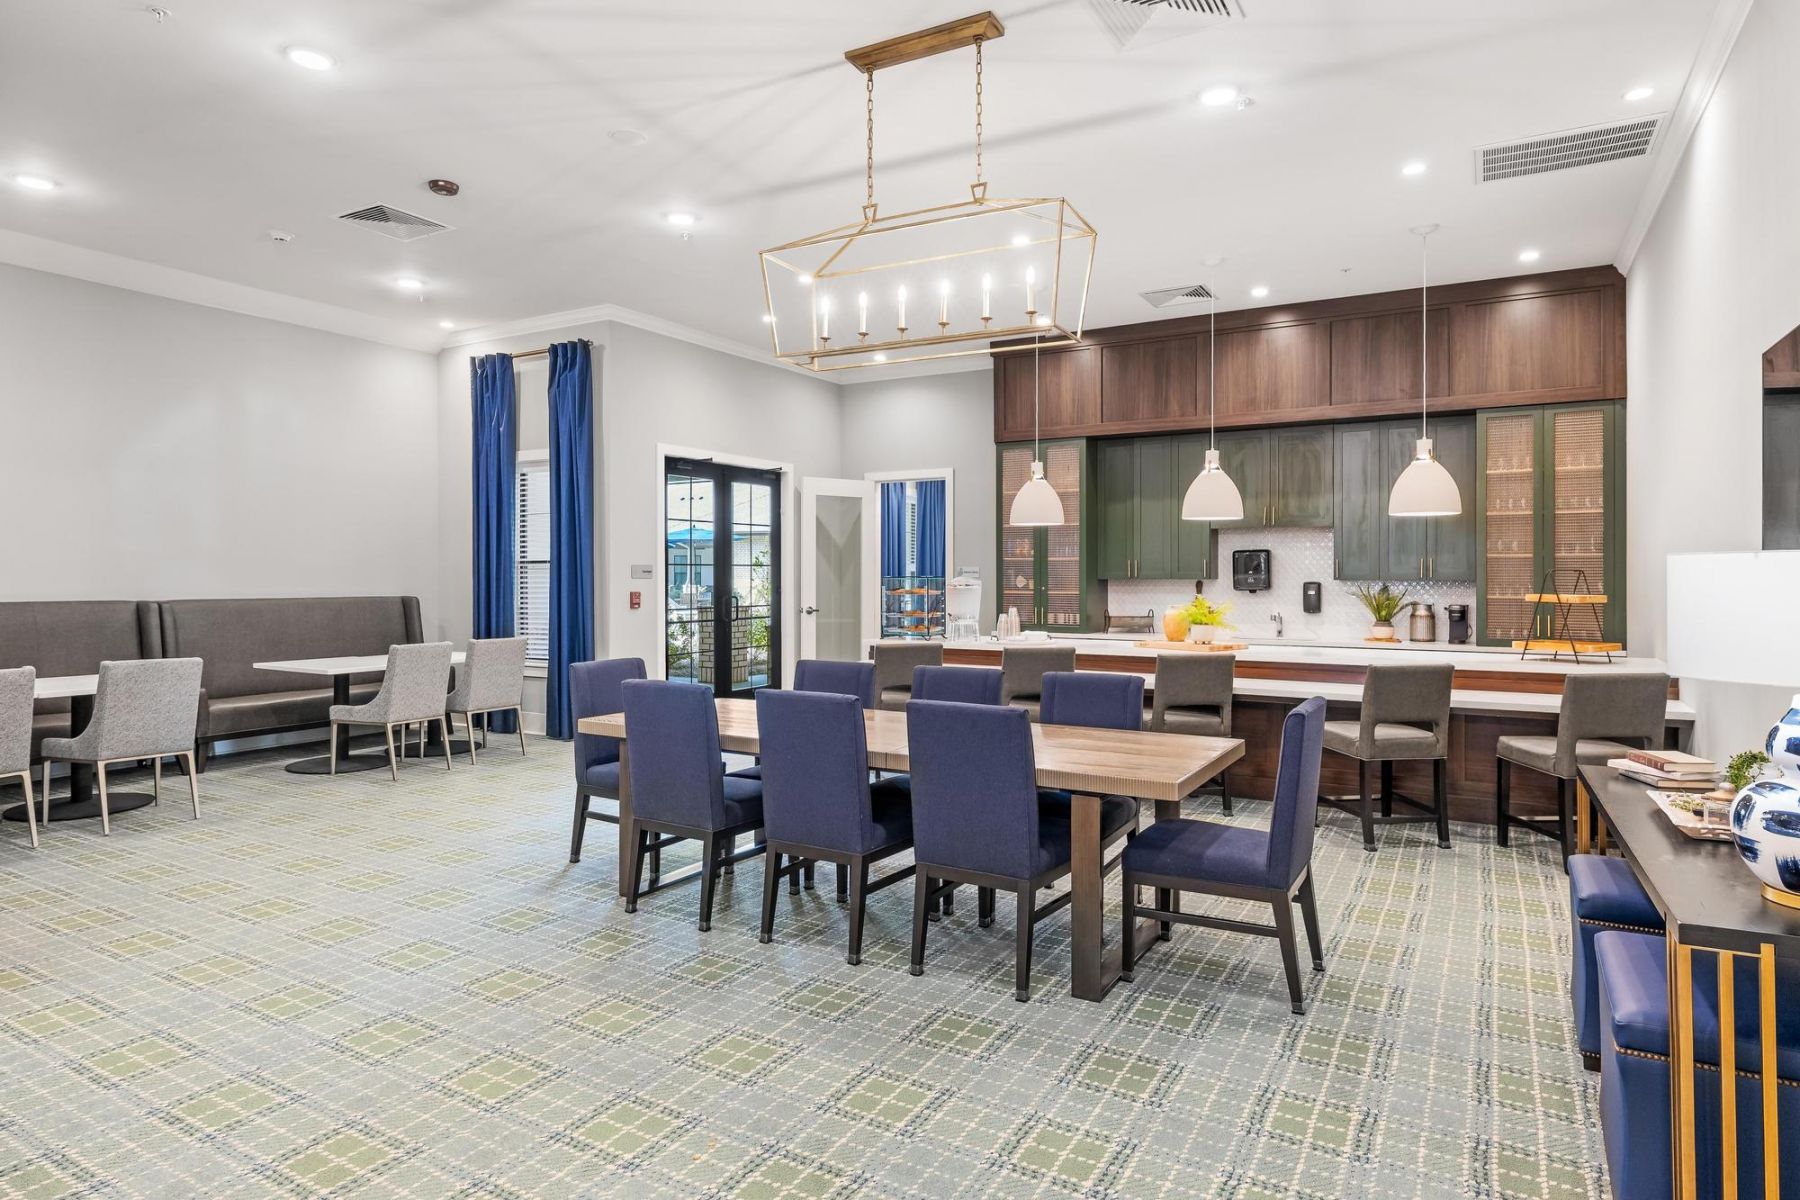 The Preserve at Meridian bistro and bar area in senior living community with table, booth, and bar seating